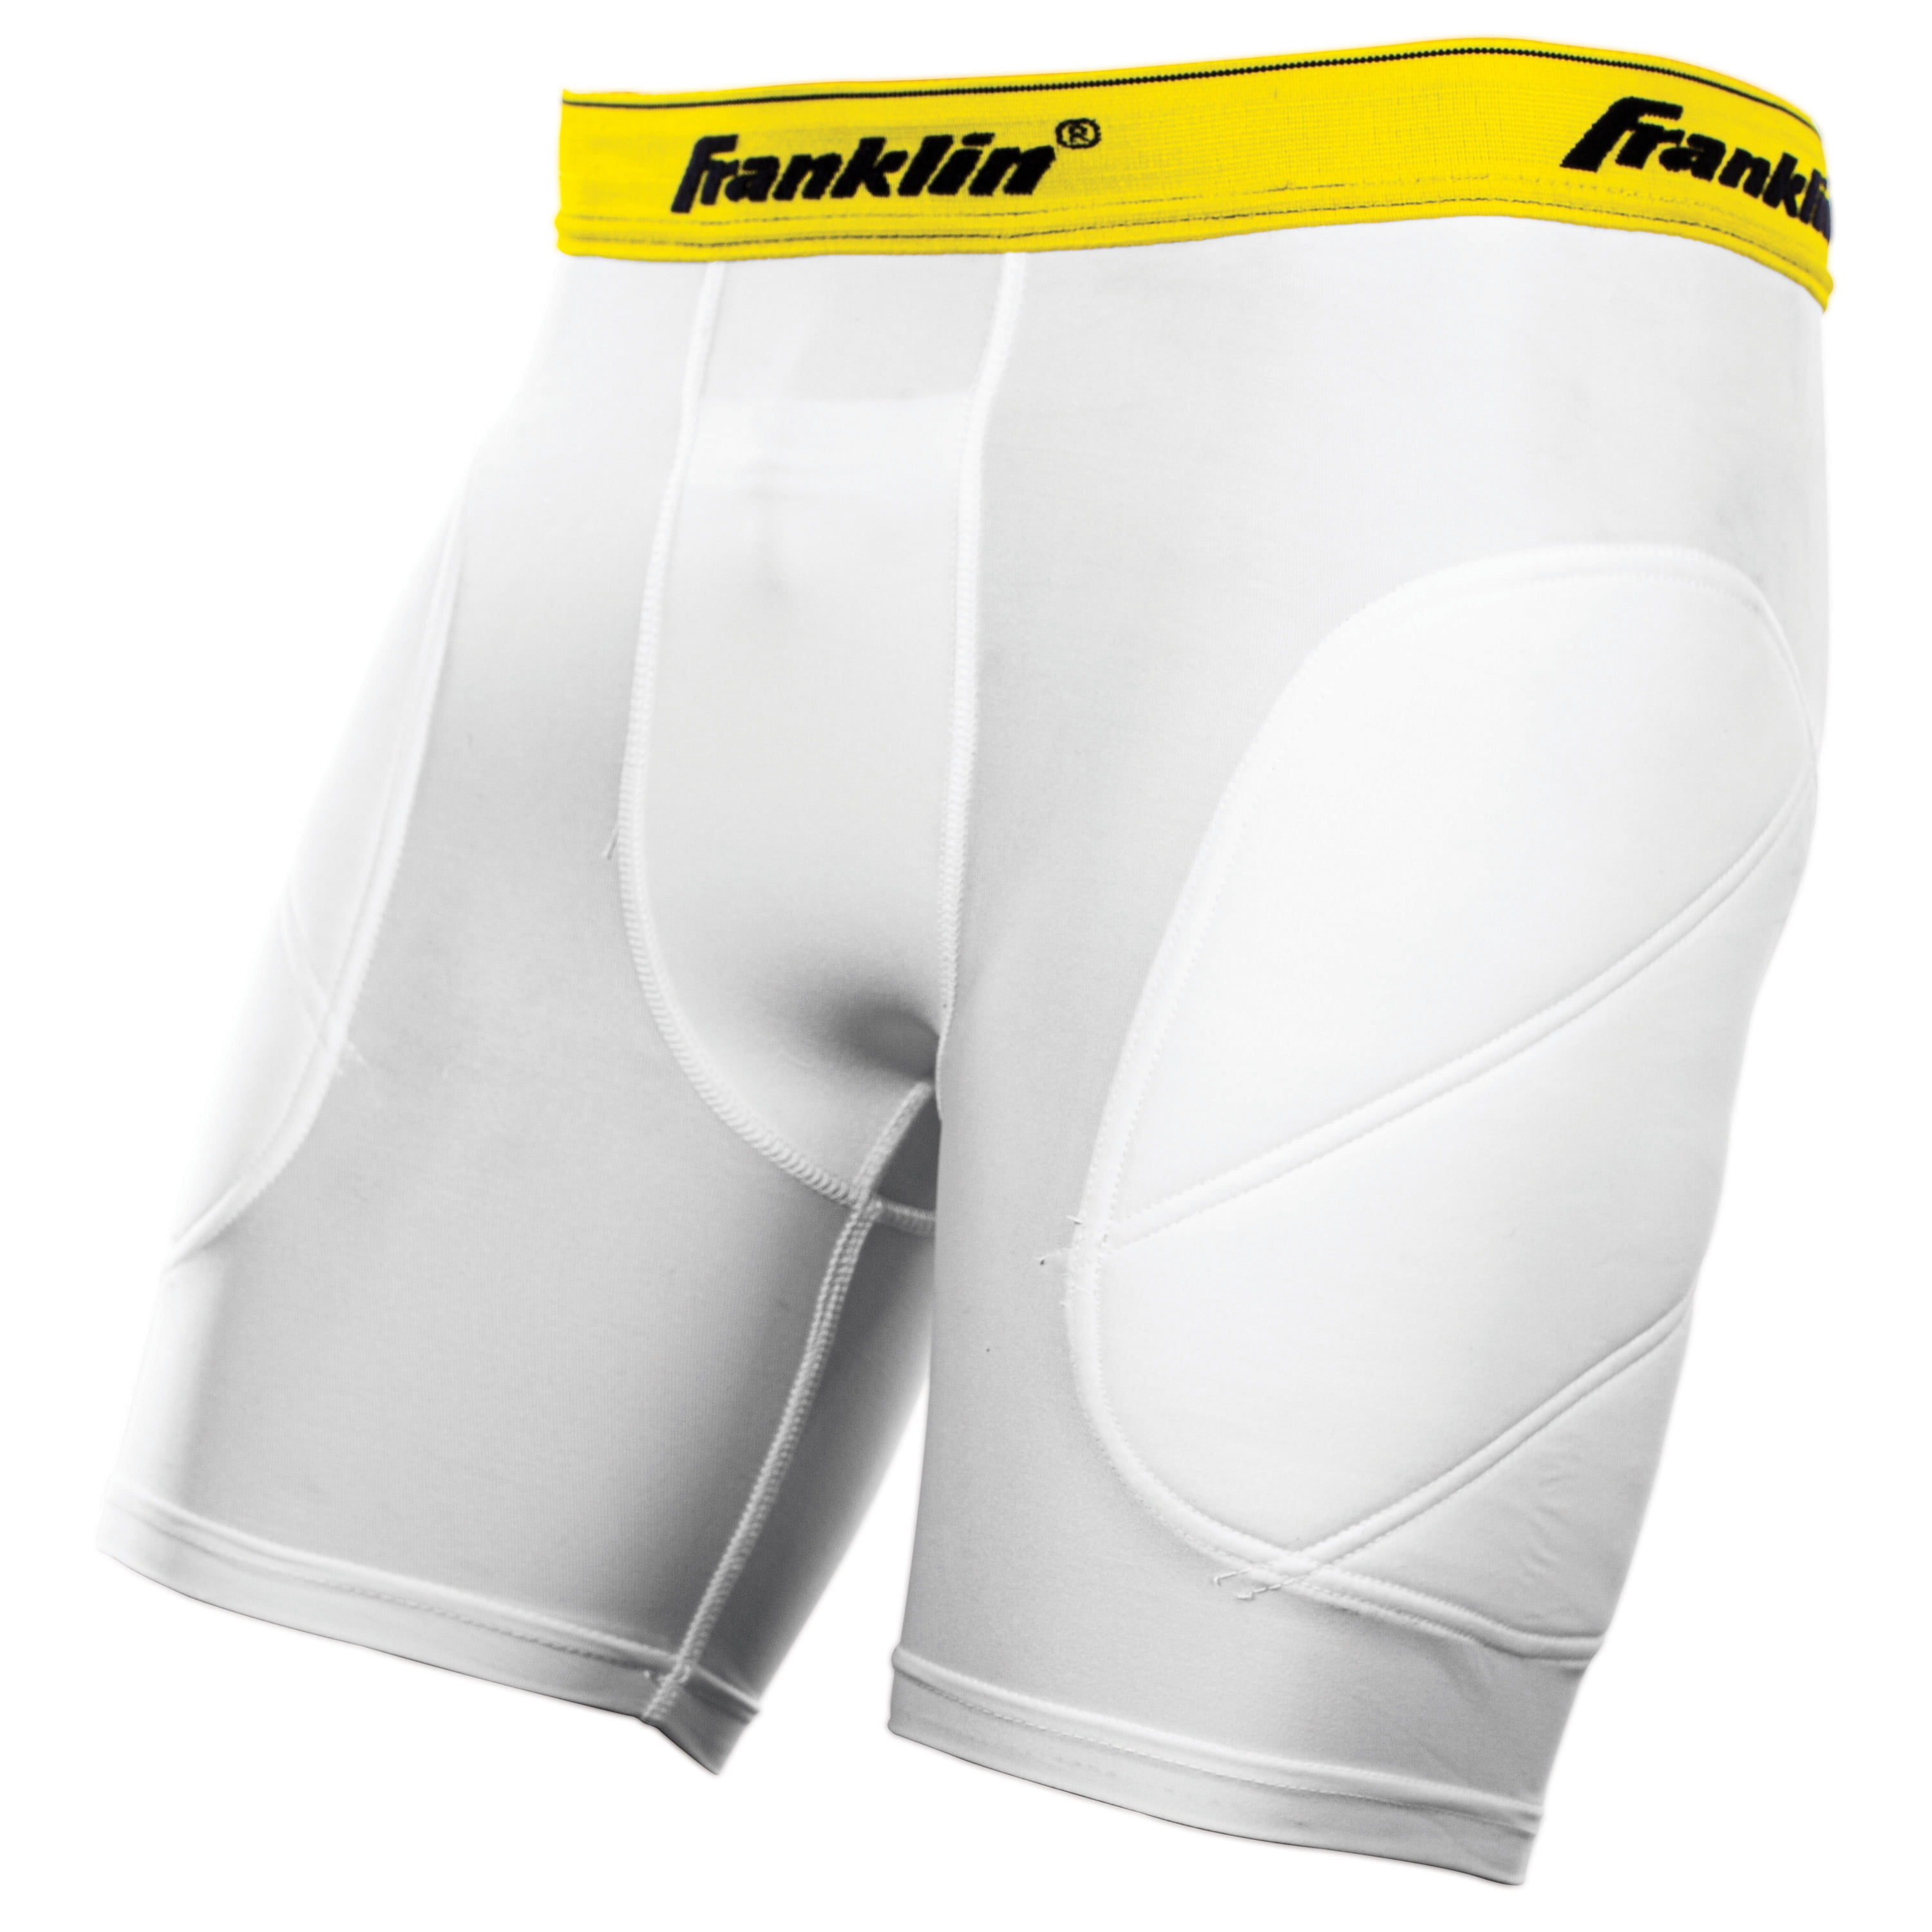 Shock Doctor Athletic Supporter Compression Shorts w BioFlex Cup Boys M 24-26 